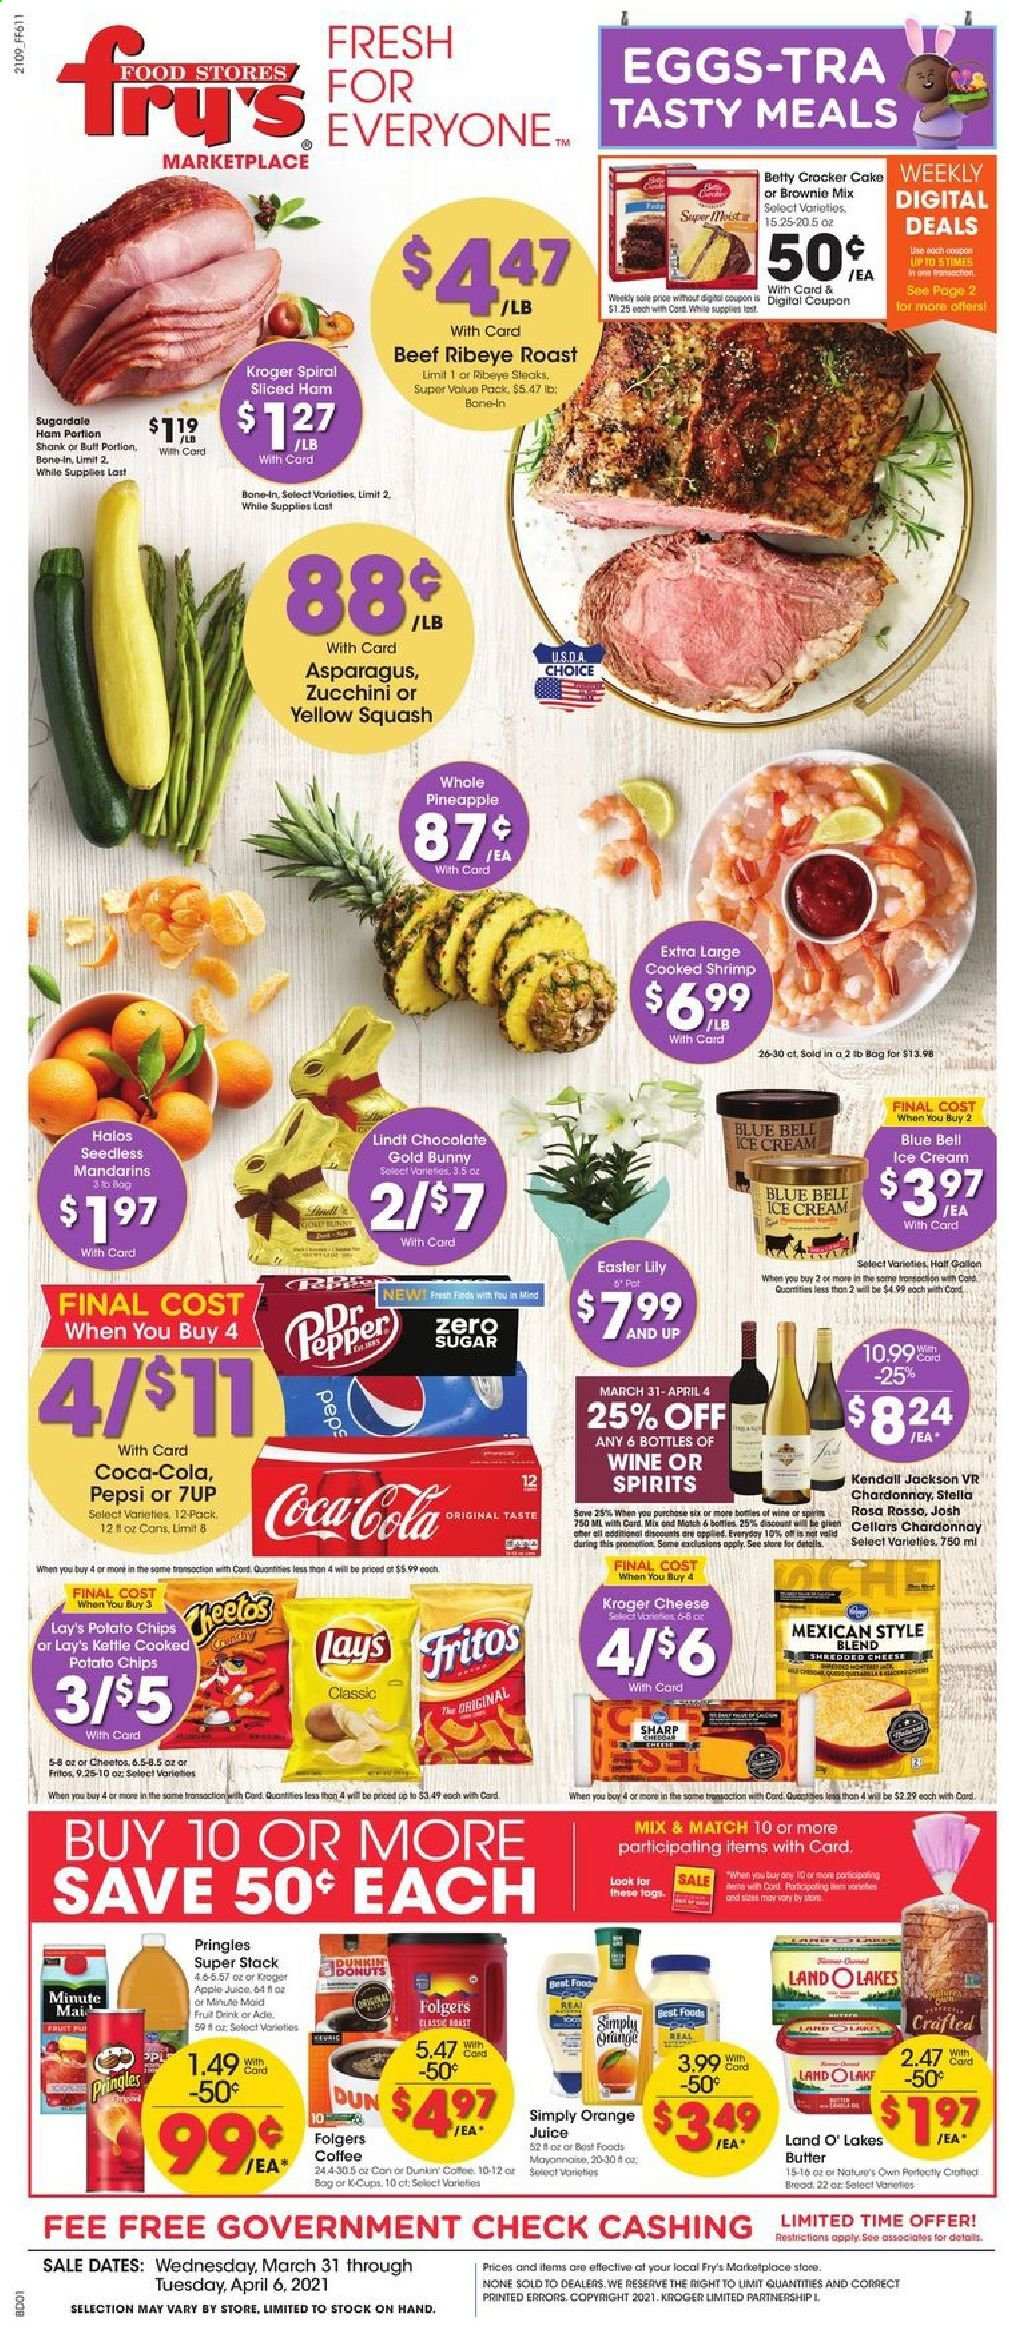 thumbnail - Fry’s Flyer - 03/31/2021 - 04/06/2021 - Sales products - Apple, brownie mix, cake, donut, shrimps, ham, shredded cheese, eggs, butter, mayonnaise, ice cream, Blue Bell, zucchini, chocolate, Lindt, potato chips, Pringles, Cheetos, chips, Lay’s, mandarines, Fritos, apple juice, Coca-Cola, Pepsi, orange juice, juice, fruit drink, 7UP, coffee, Folgers, L'Or, Chardonnay, wine, beef meat, steak, ribeye steak, pot, Sharp, asparagus, pineapple. Page 1.